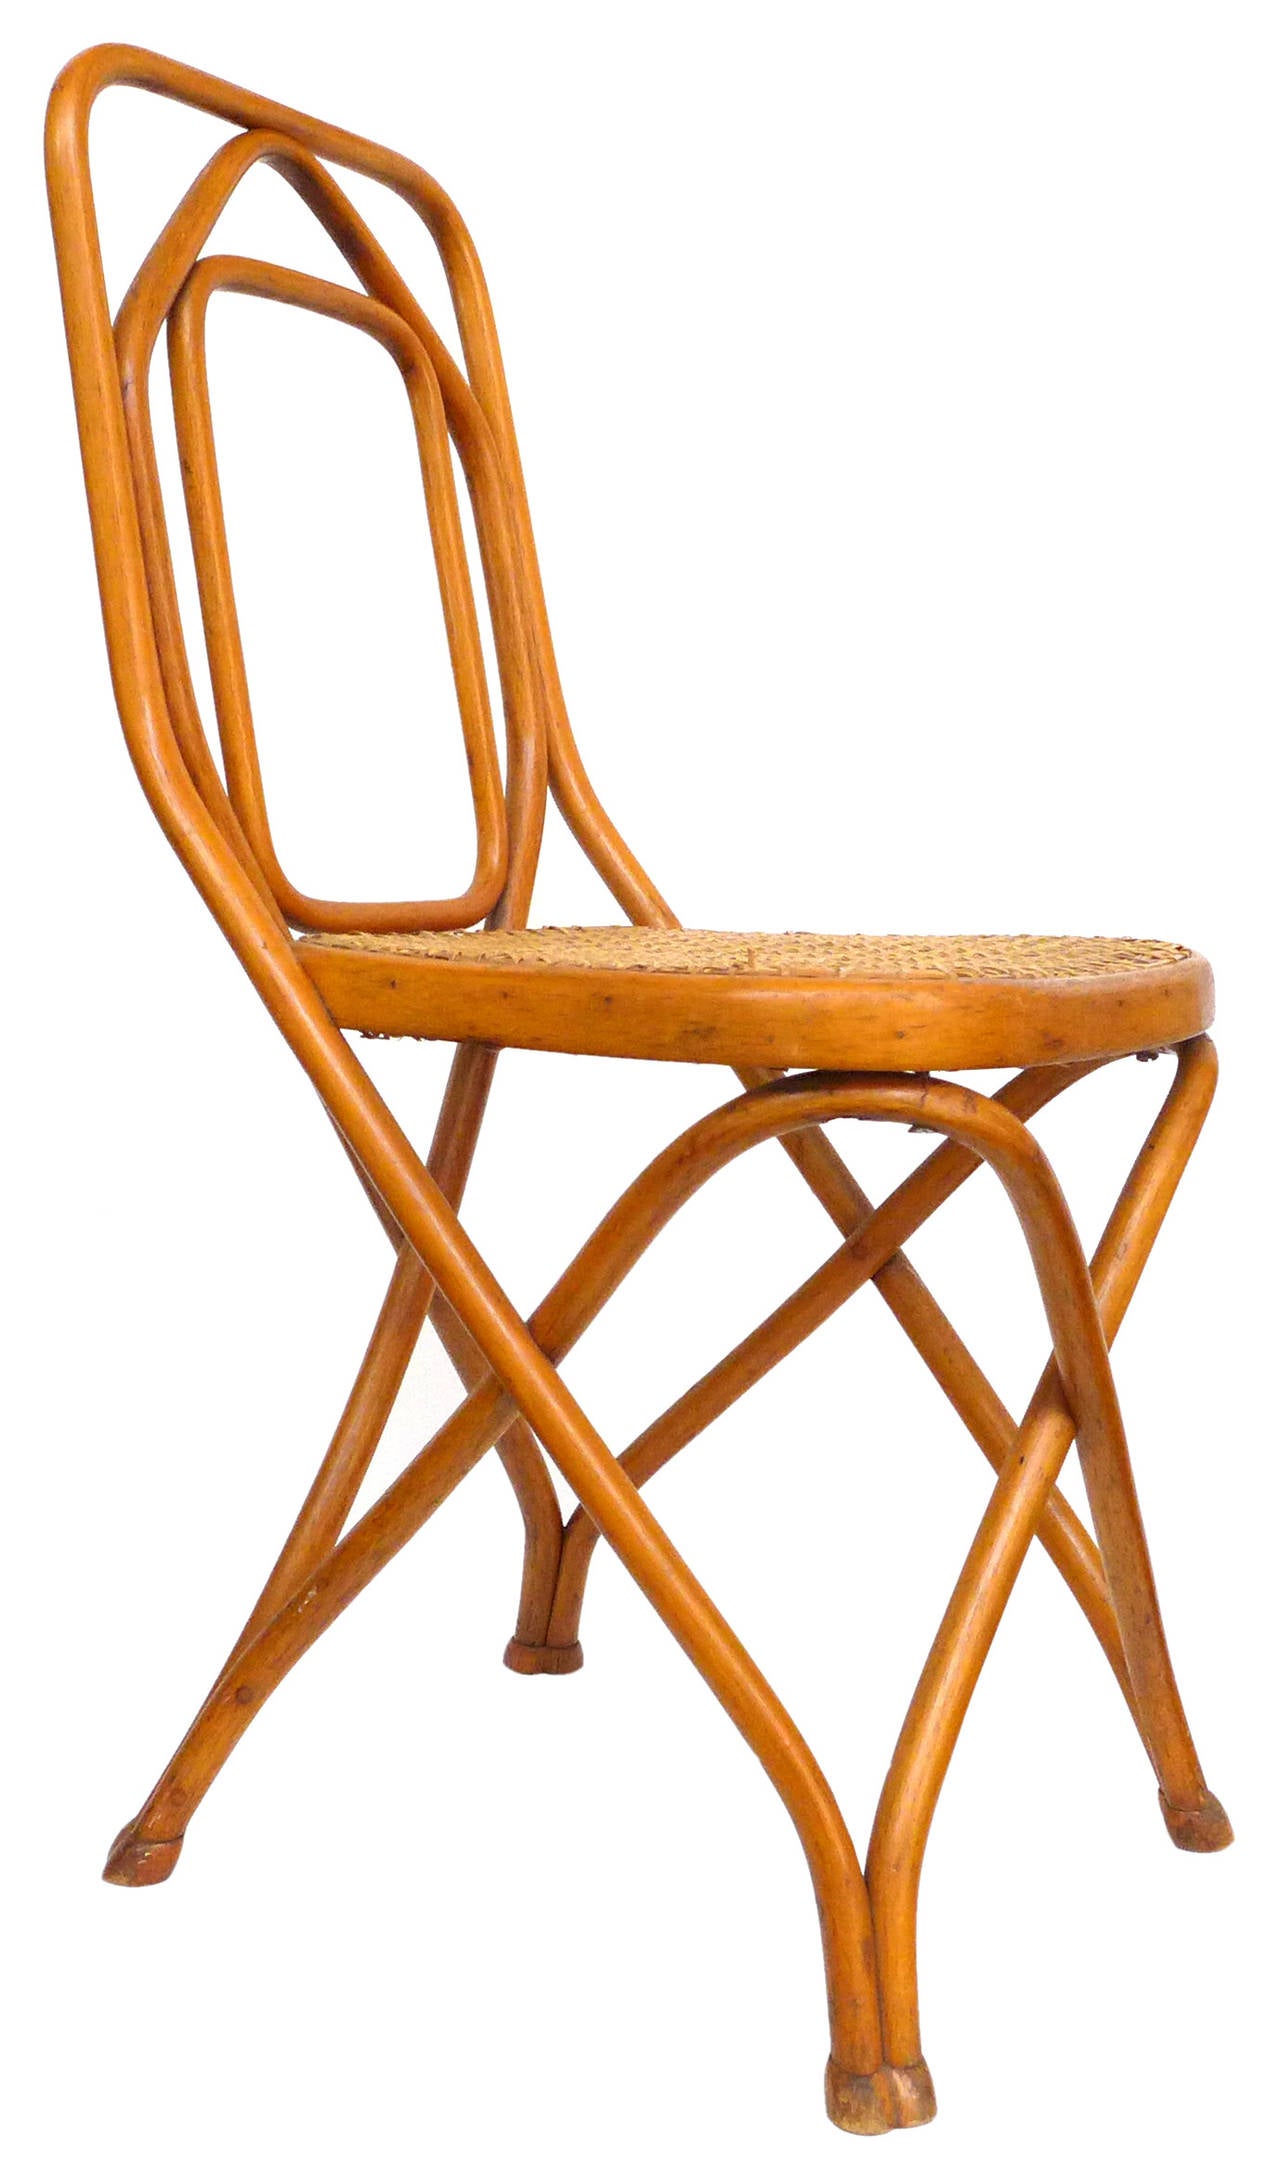 An exceptionally rare and exquisite set of 4 chairs by Thonet.  Classic Thonet materials of bentwood and woven cane in an elegant, unusual variation on the more typically-seen Thonet forms:  softly geometric, concentric loops at the back continuing